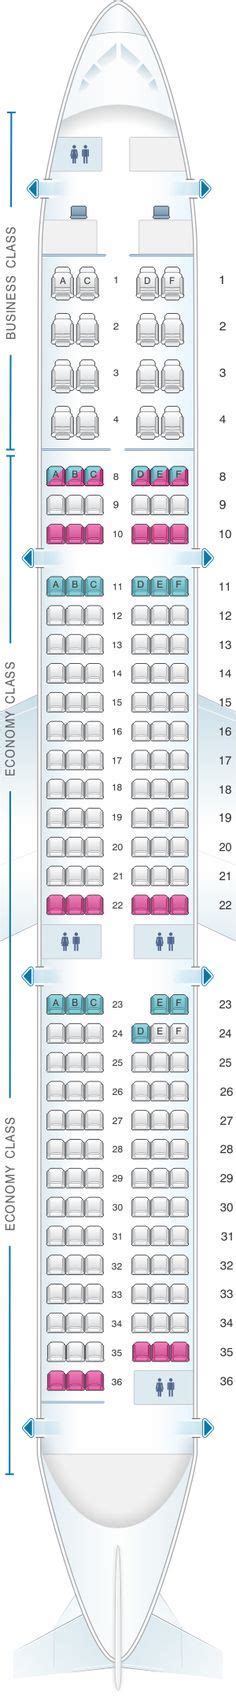 Seat Map Lufthansa Airbus A350 900 Config2 China Eastern Airlines